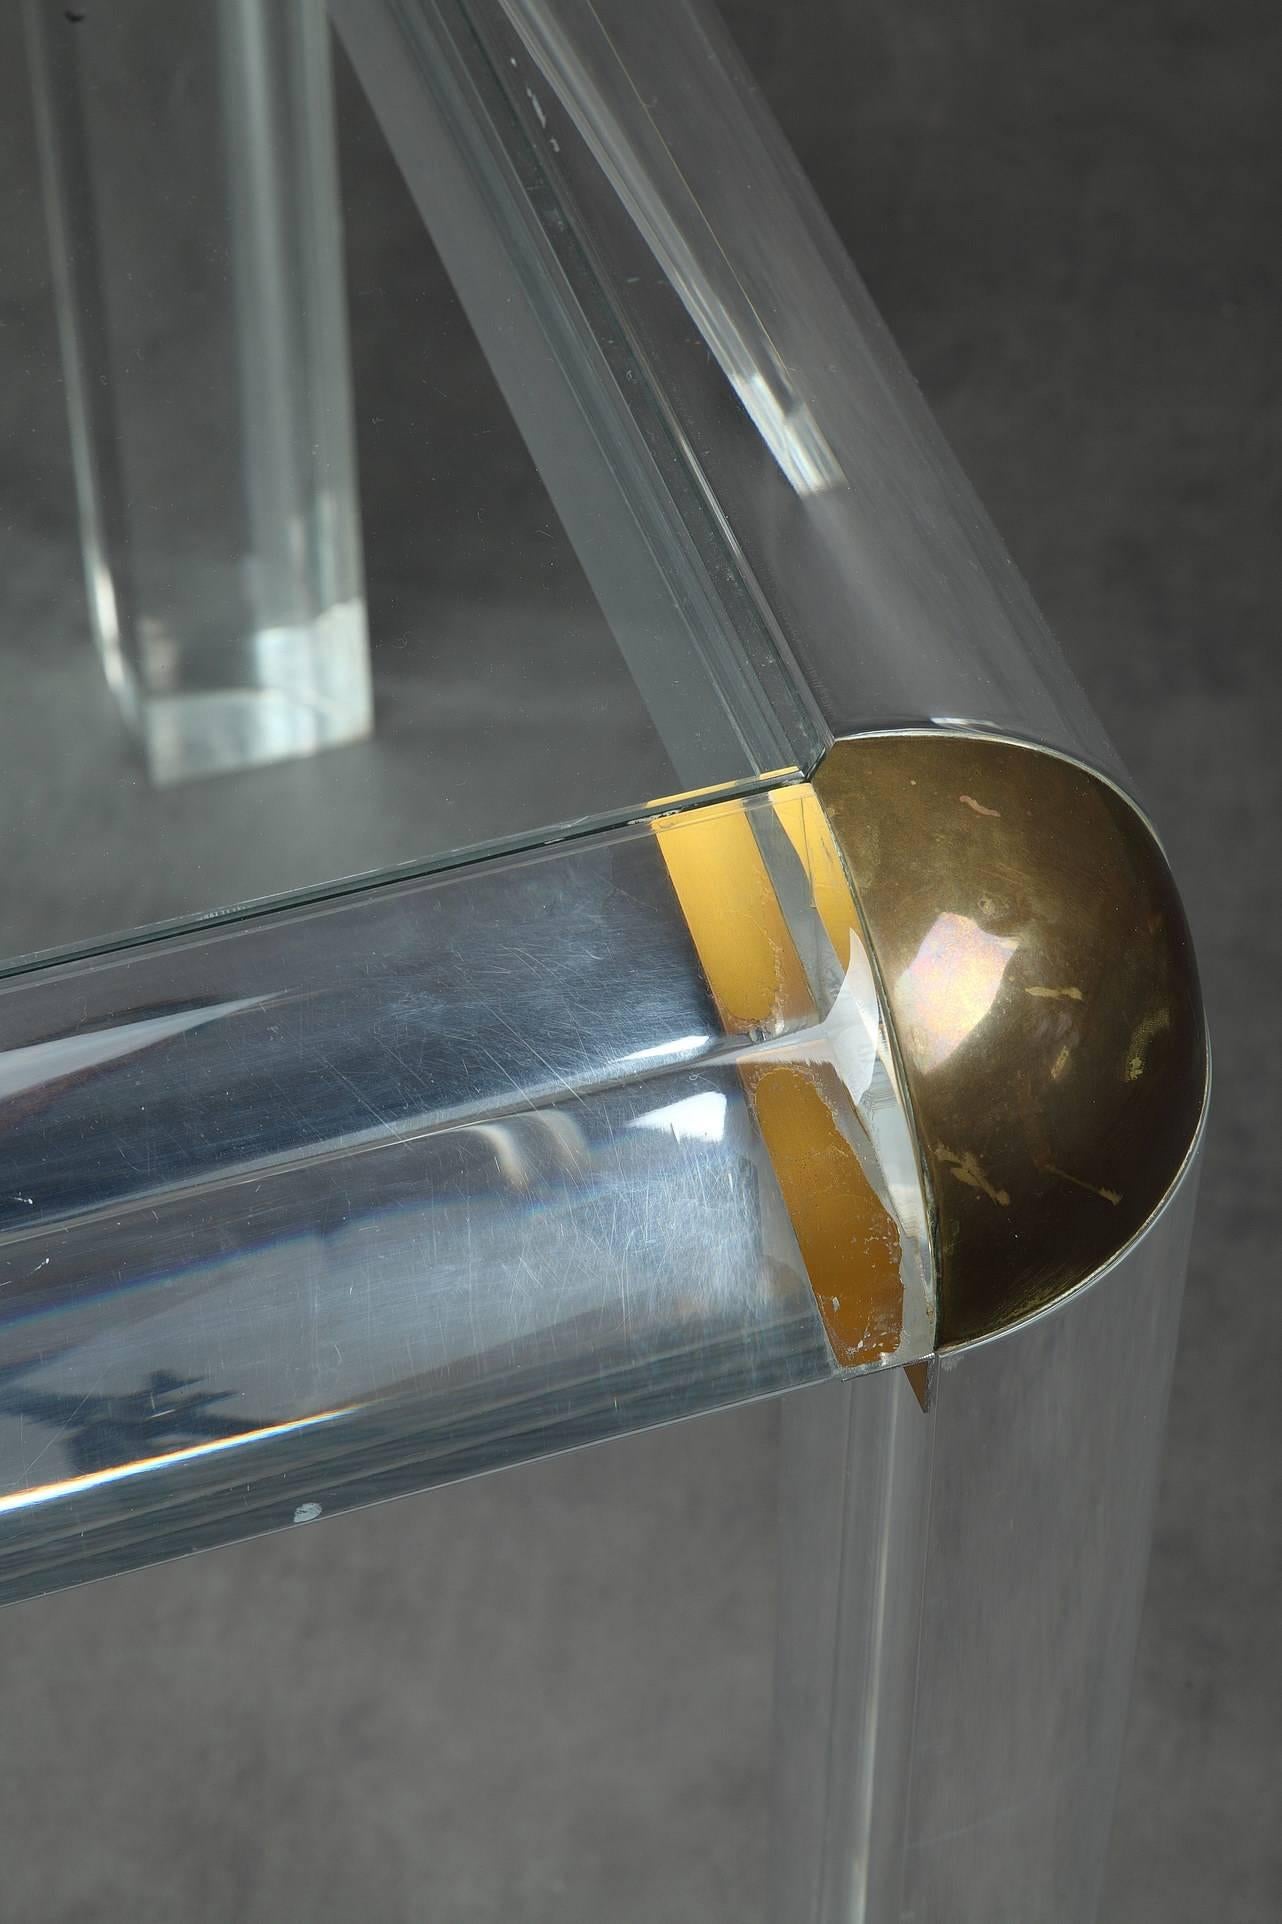 Important plexiglass (Lucite) table with round gilded brass corners and glass tray. It is set on four quarter cylinder feet. Beautiful Italian work of the 1970s.,

circa 1970
Dimension: W 62.2 in, D 34.6in, H 29.5in.
Dimension: L 158cm, P 88cm,